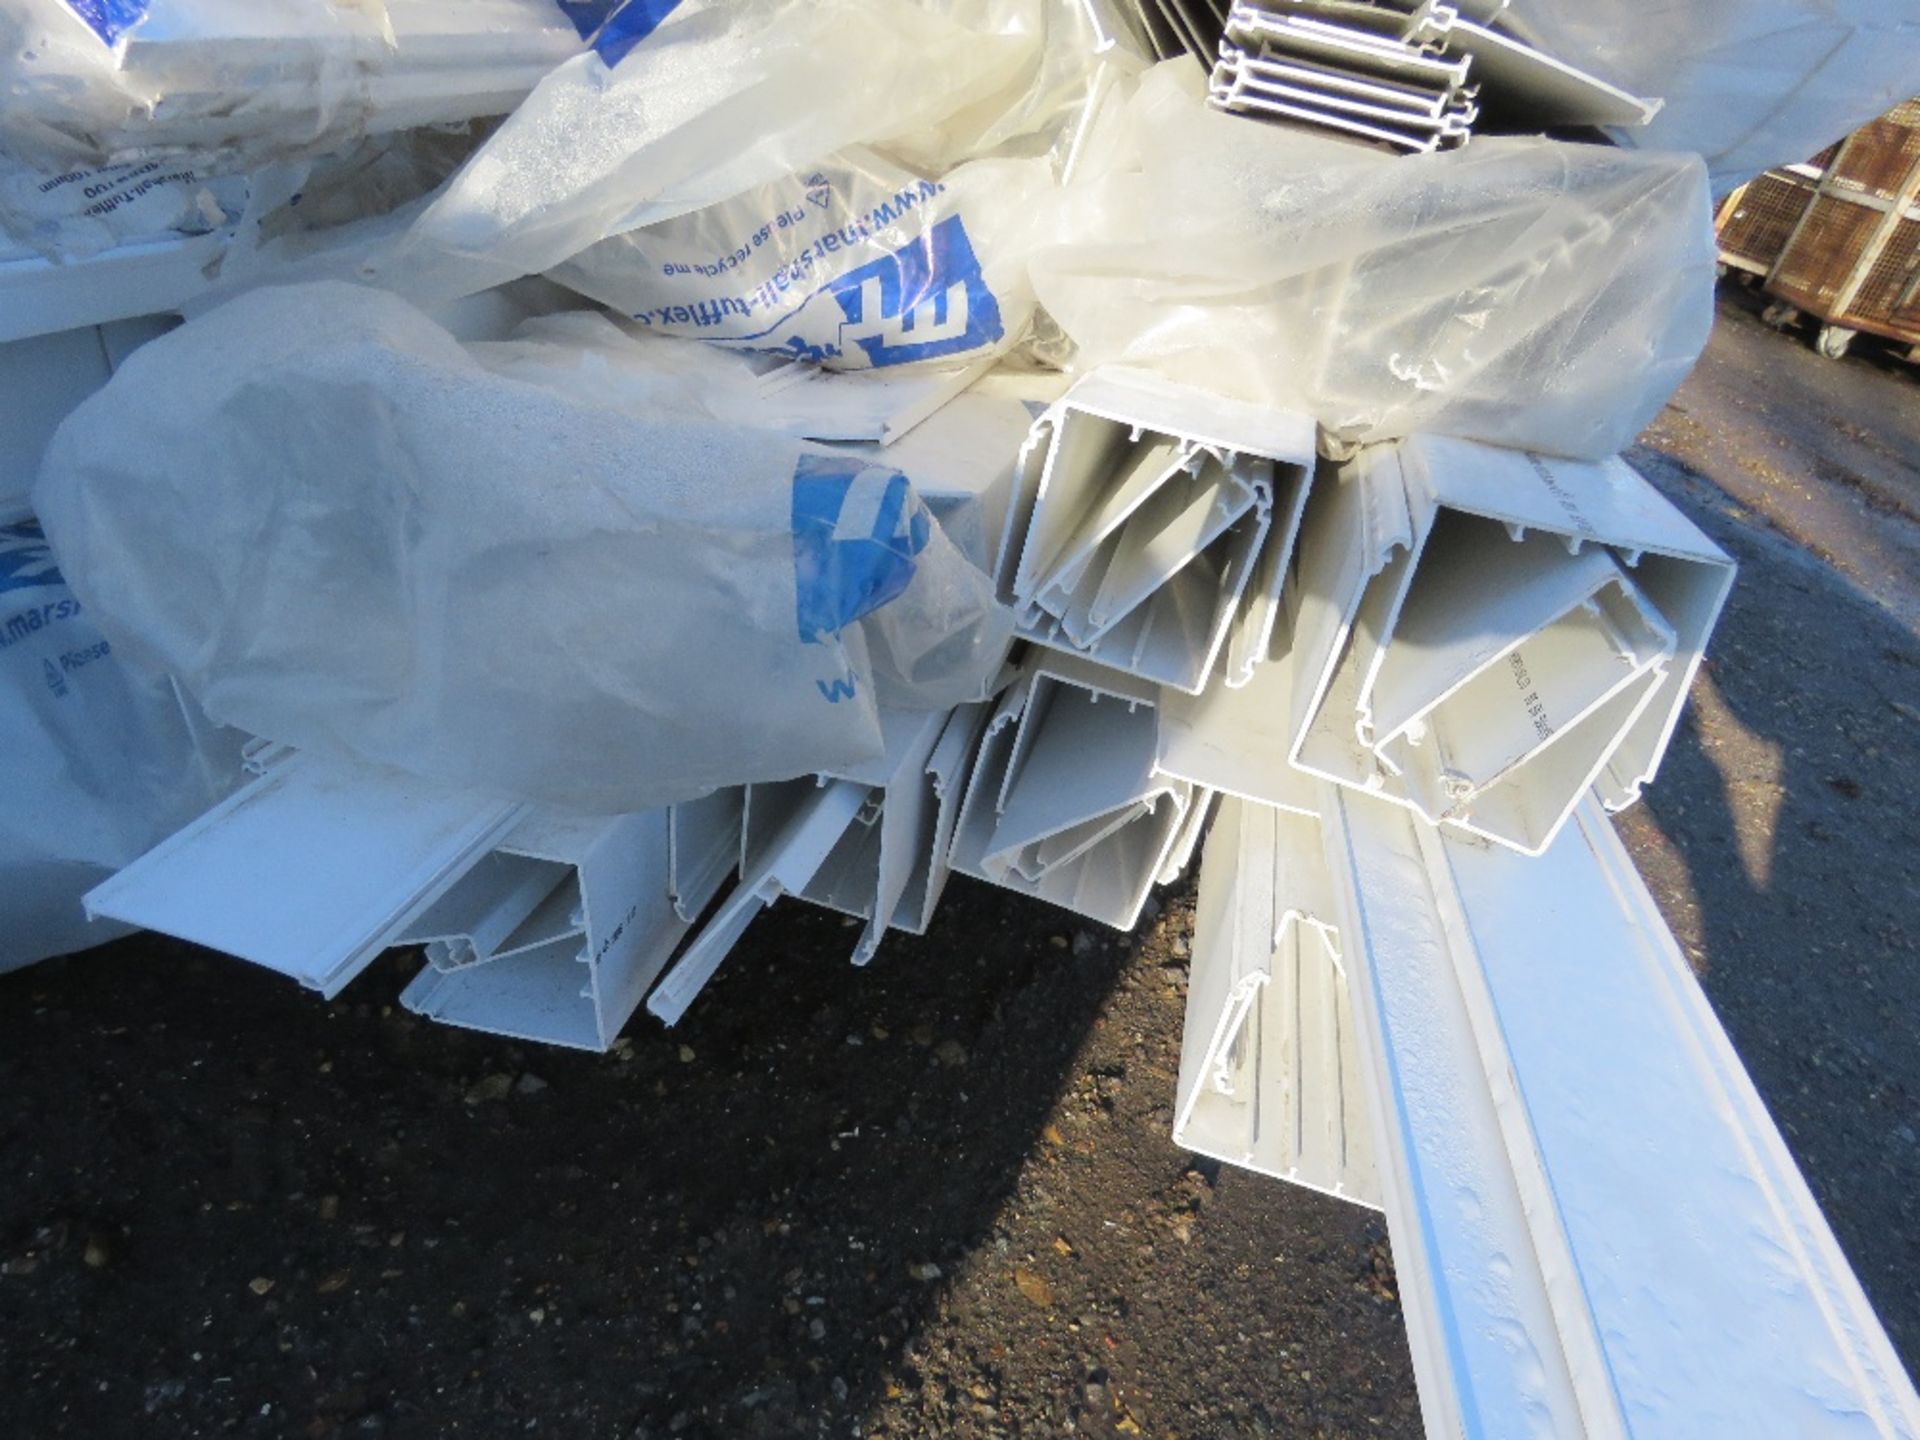 LARGE QUANTITY OF PLASTIC CABLE DUCTING PARTS 9-12FT APPROX... SOURCED FROM COMPANY LIQUIDATION. - Image 7 of 8